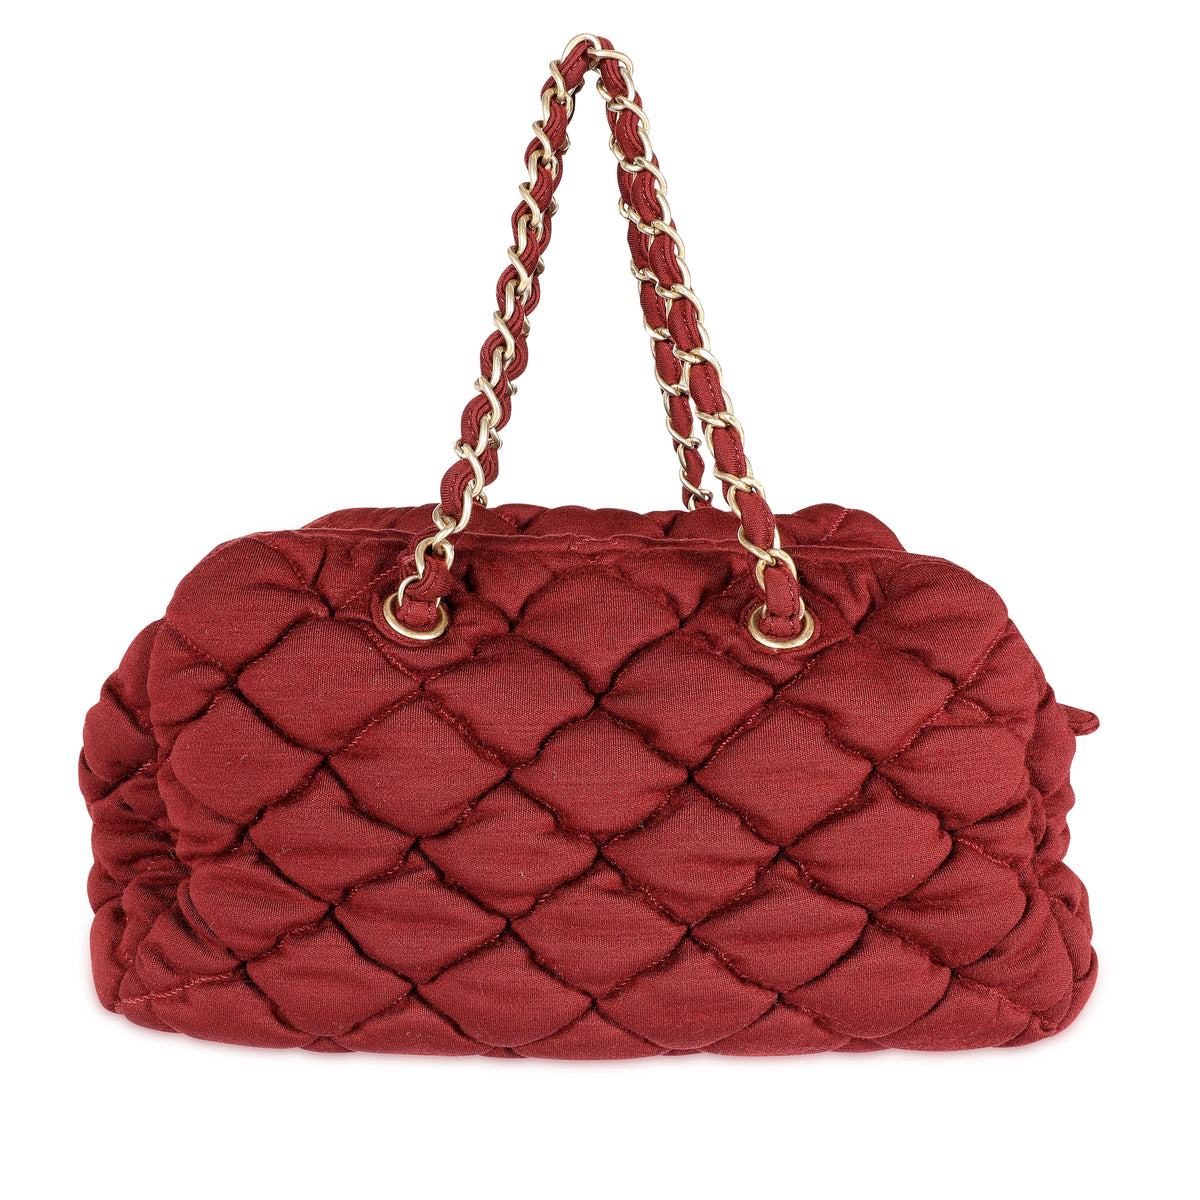 Chanel Burgundy Jersey Quilted Bubble Bag